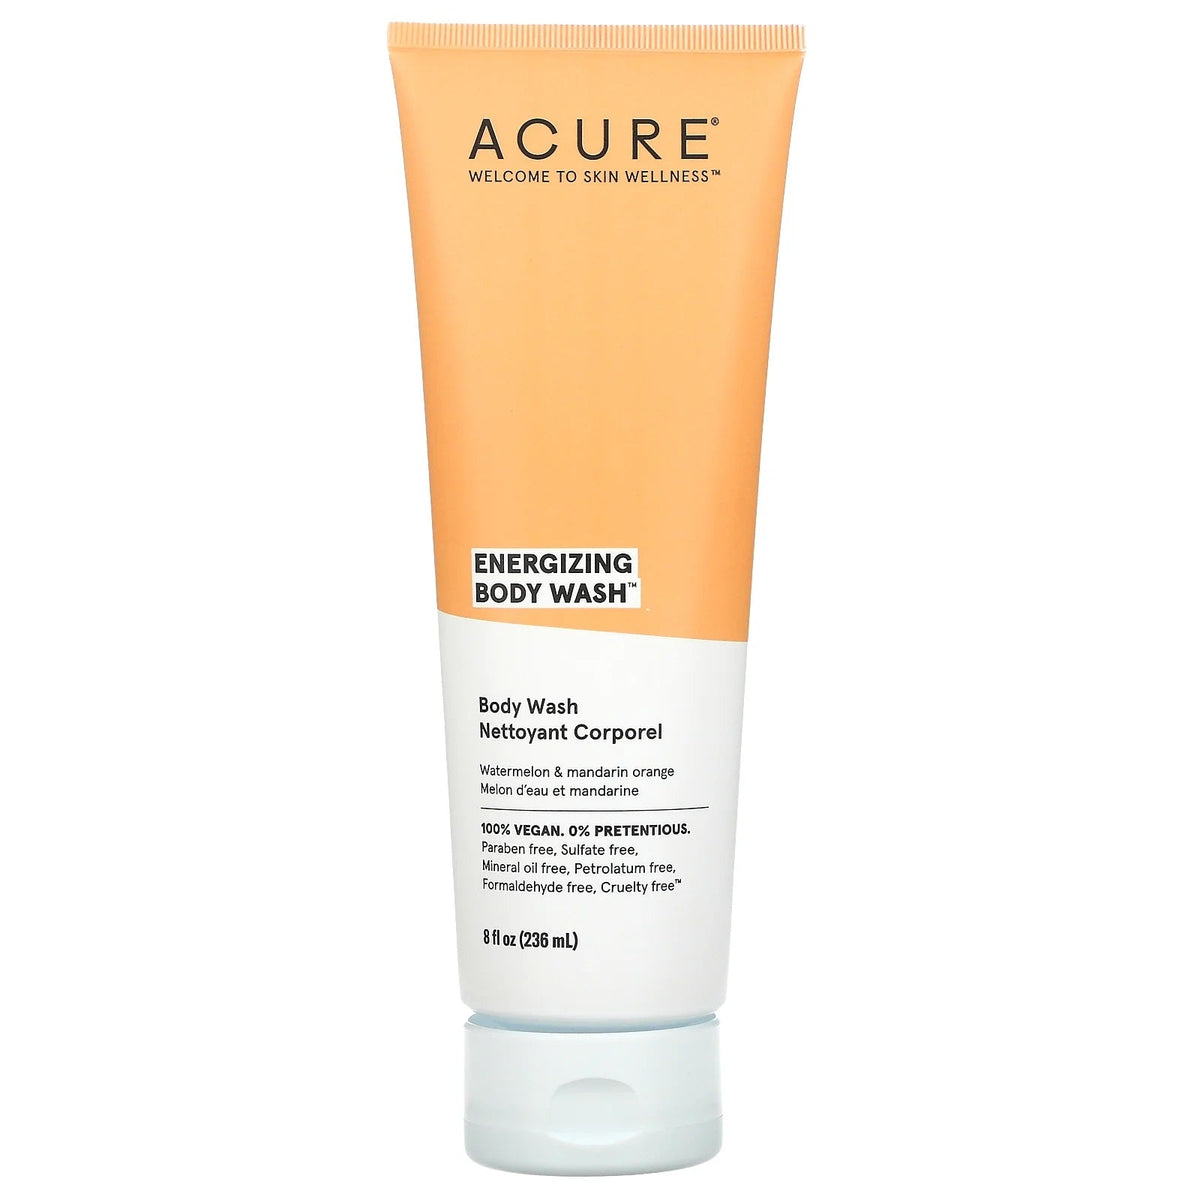 ACURE - Energizing Body Wash - ProCare Outlet by Acure